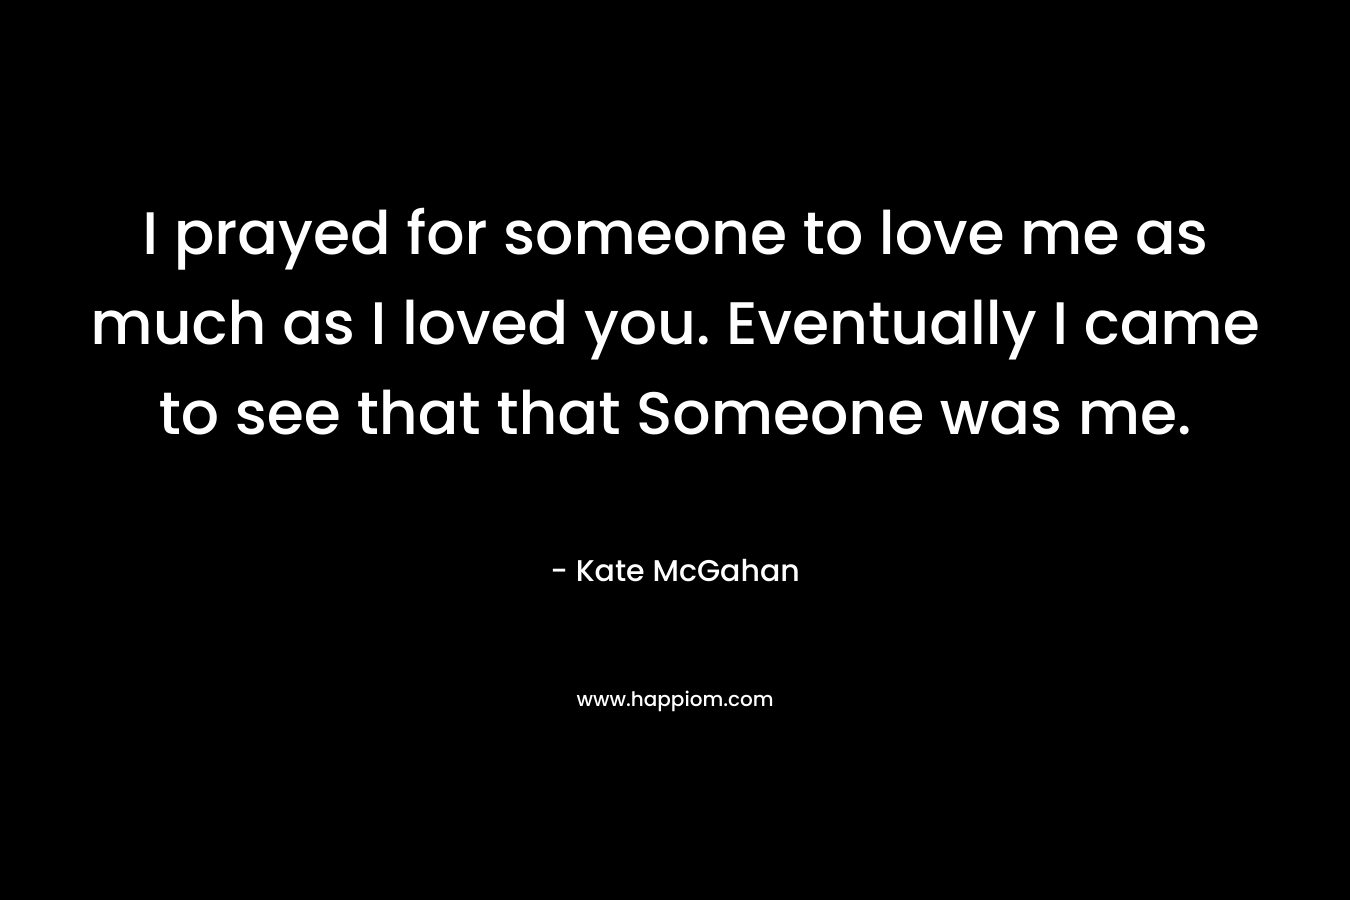 I prayed for someone to love me as much as I loved you. Eventually I came to see that that Someone was me. – Kate McGahan